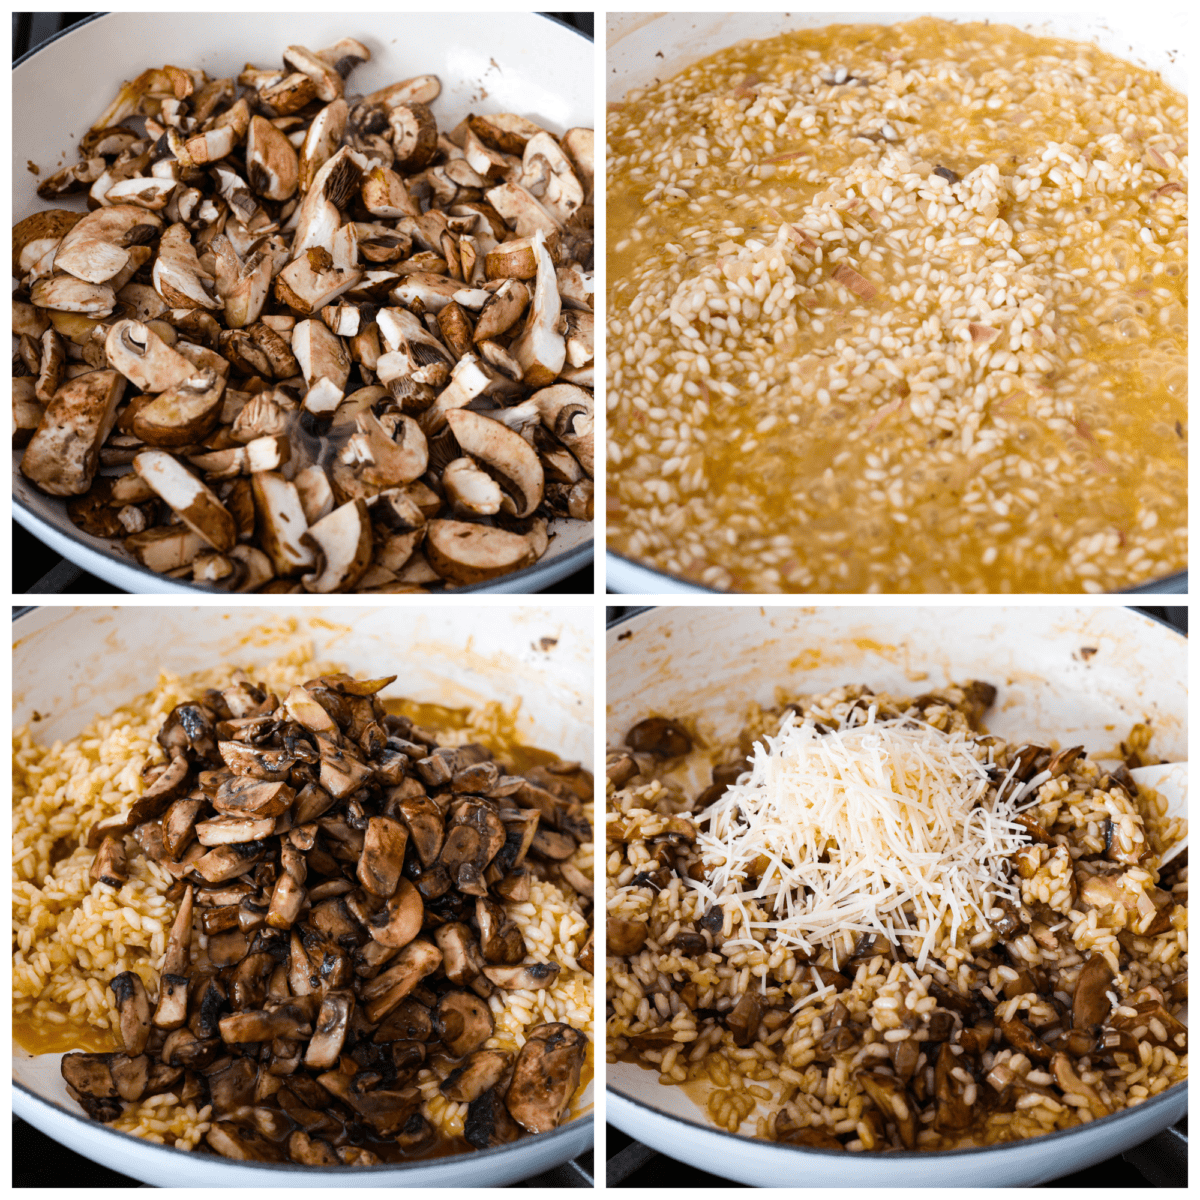 4-photo collage of the mushrooms and rice being cooked together.